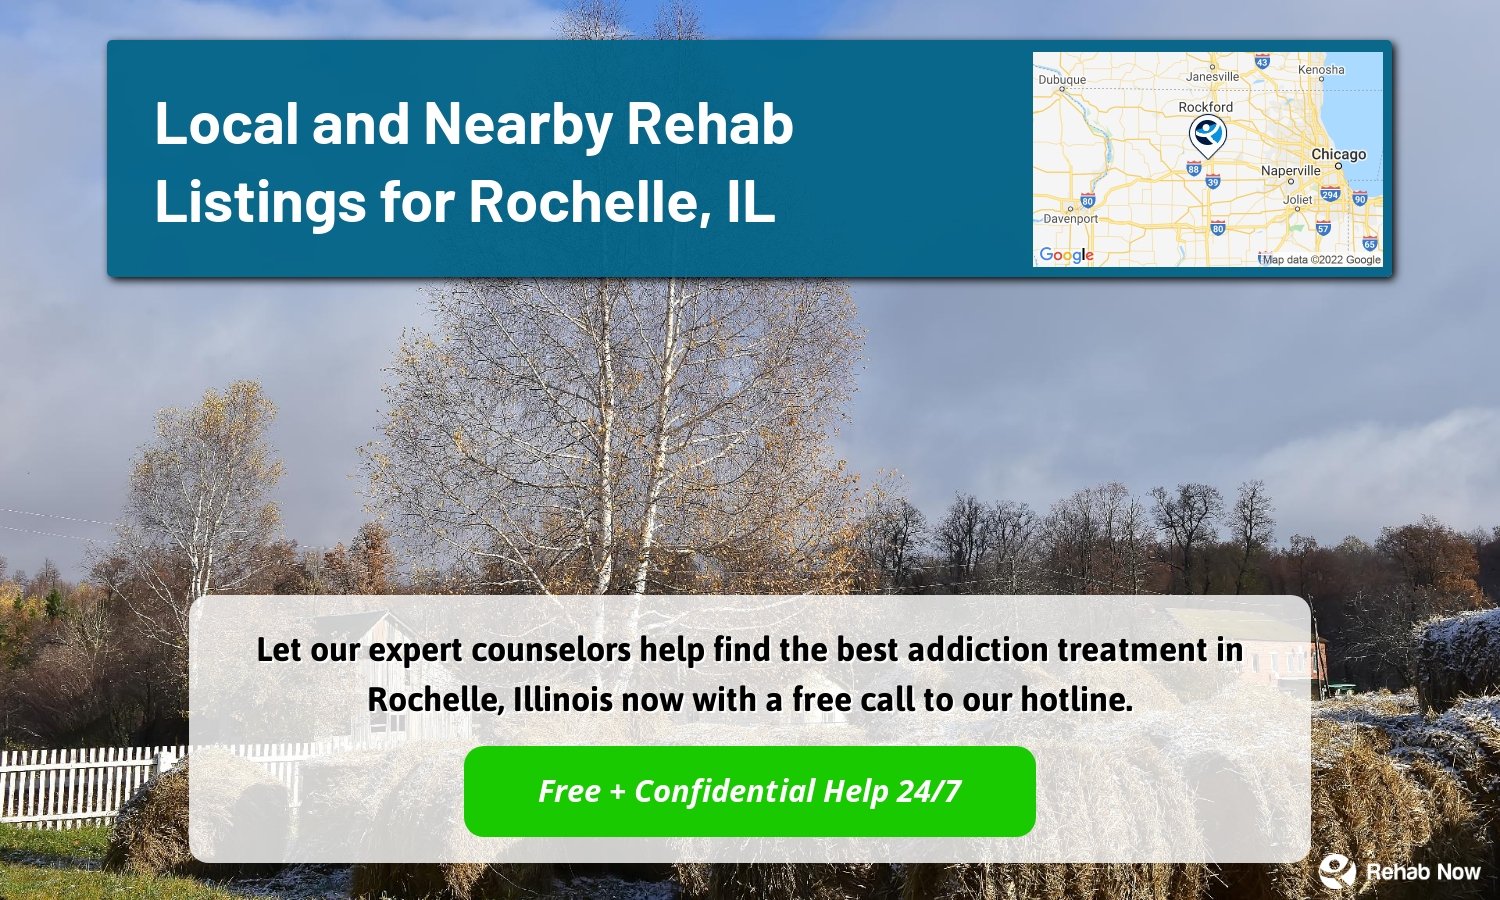 Let our expert counselors help find the best addiction treatment in Rochelle, Illinois now with a free call to our hotline.